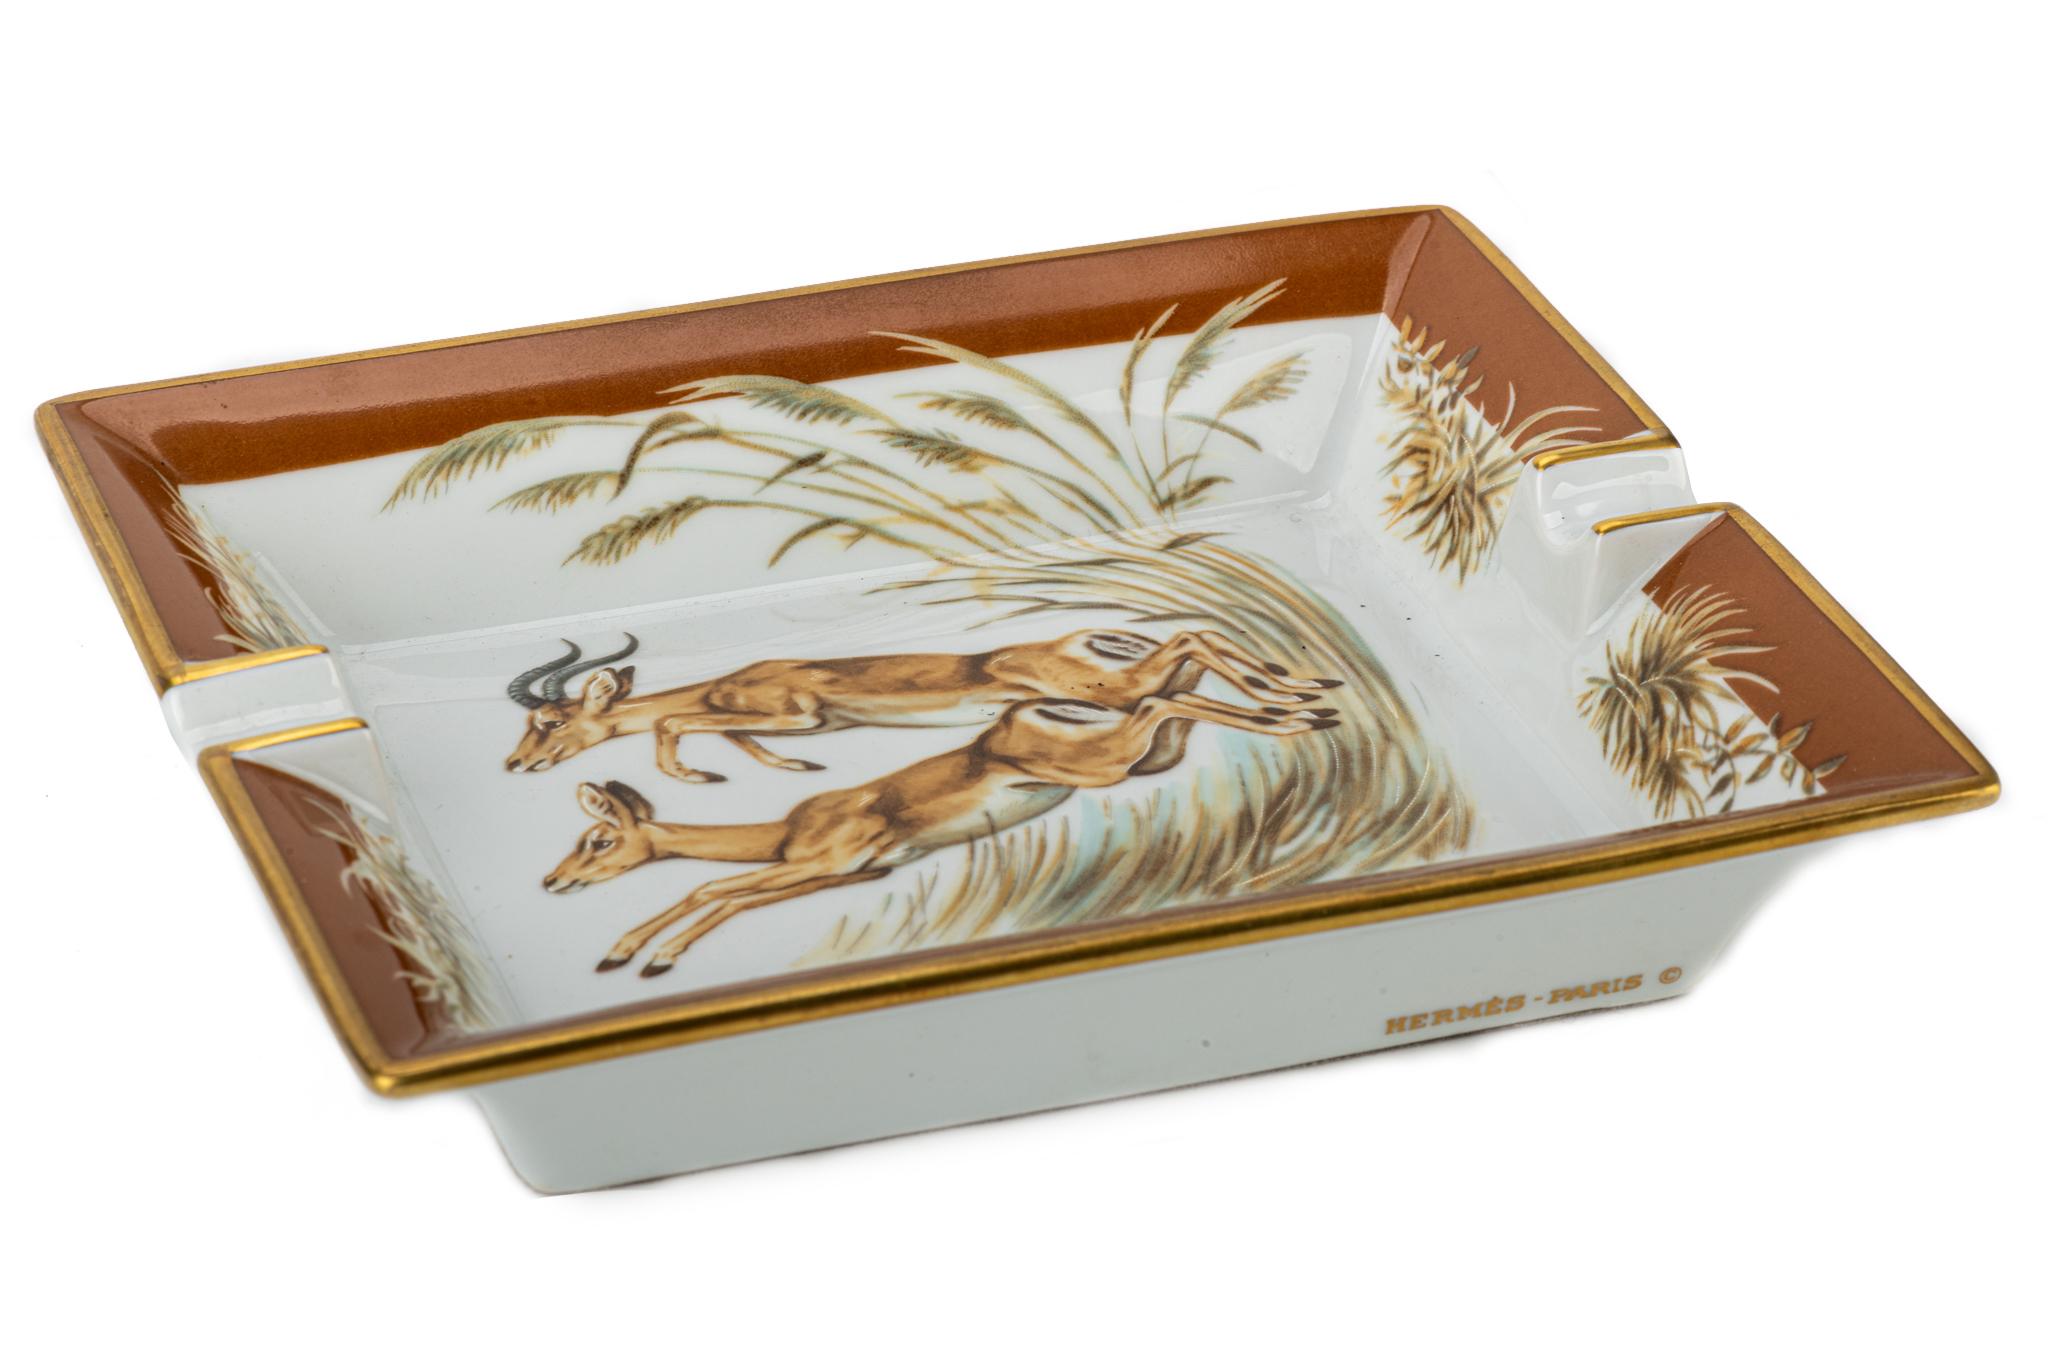 Vintage Hermes ashtray showing a pattern with two jumping antelopes in center of the piece.